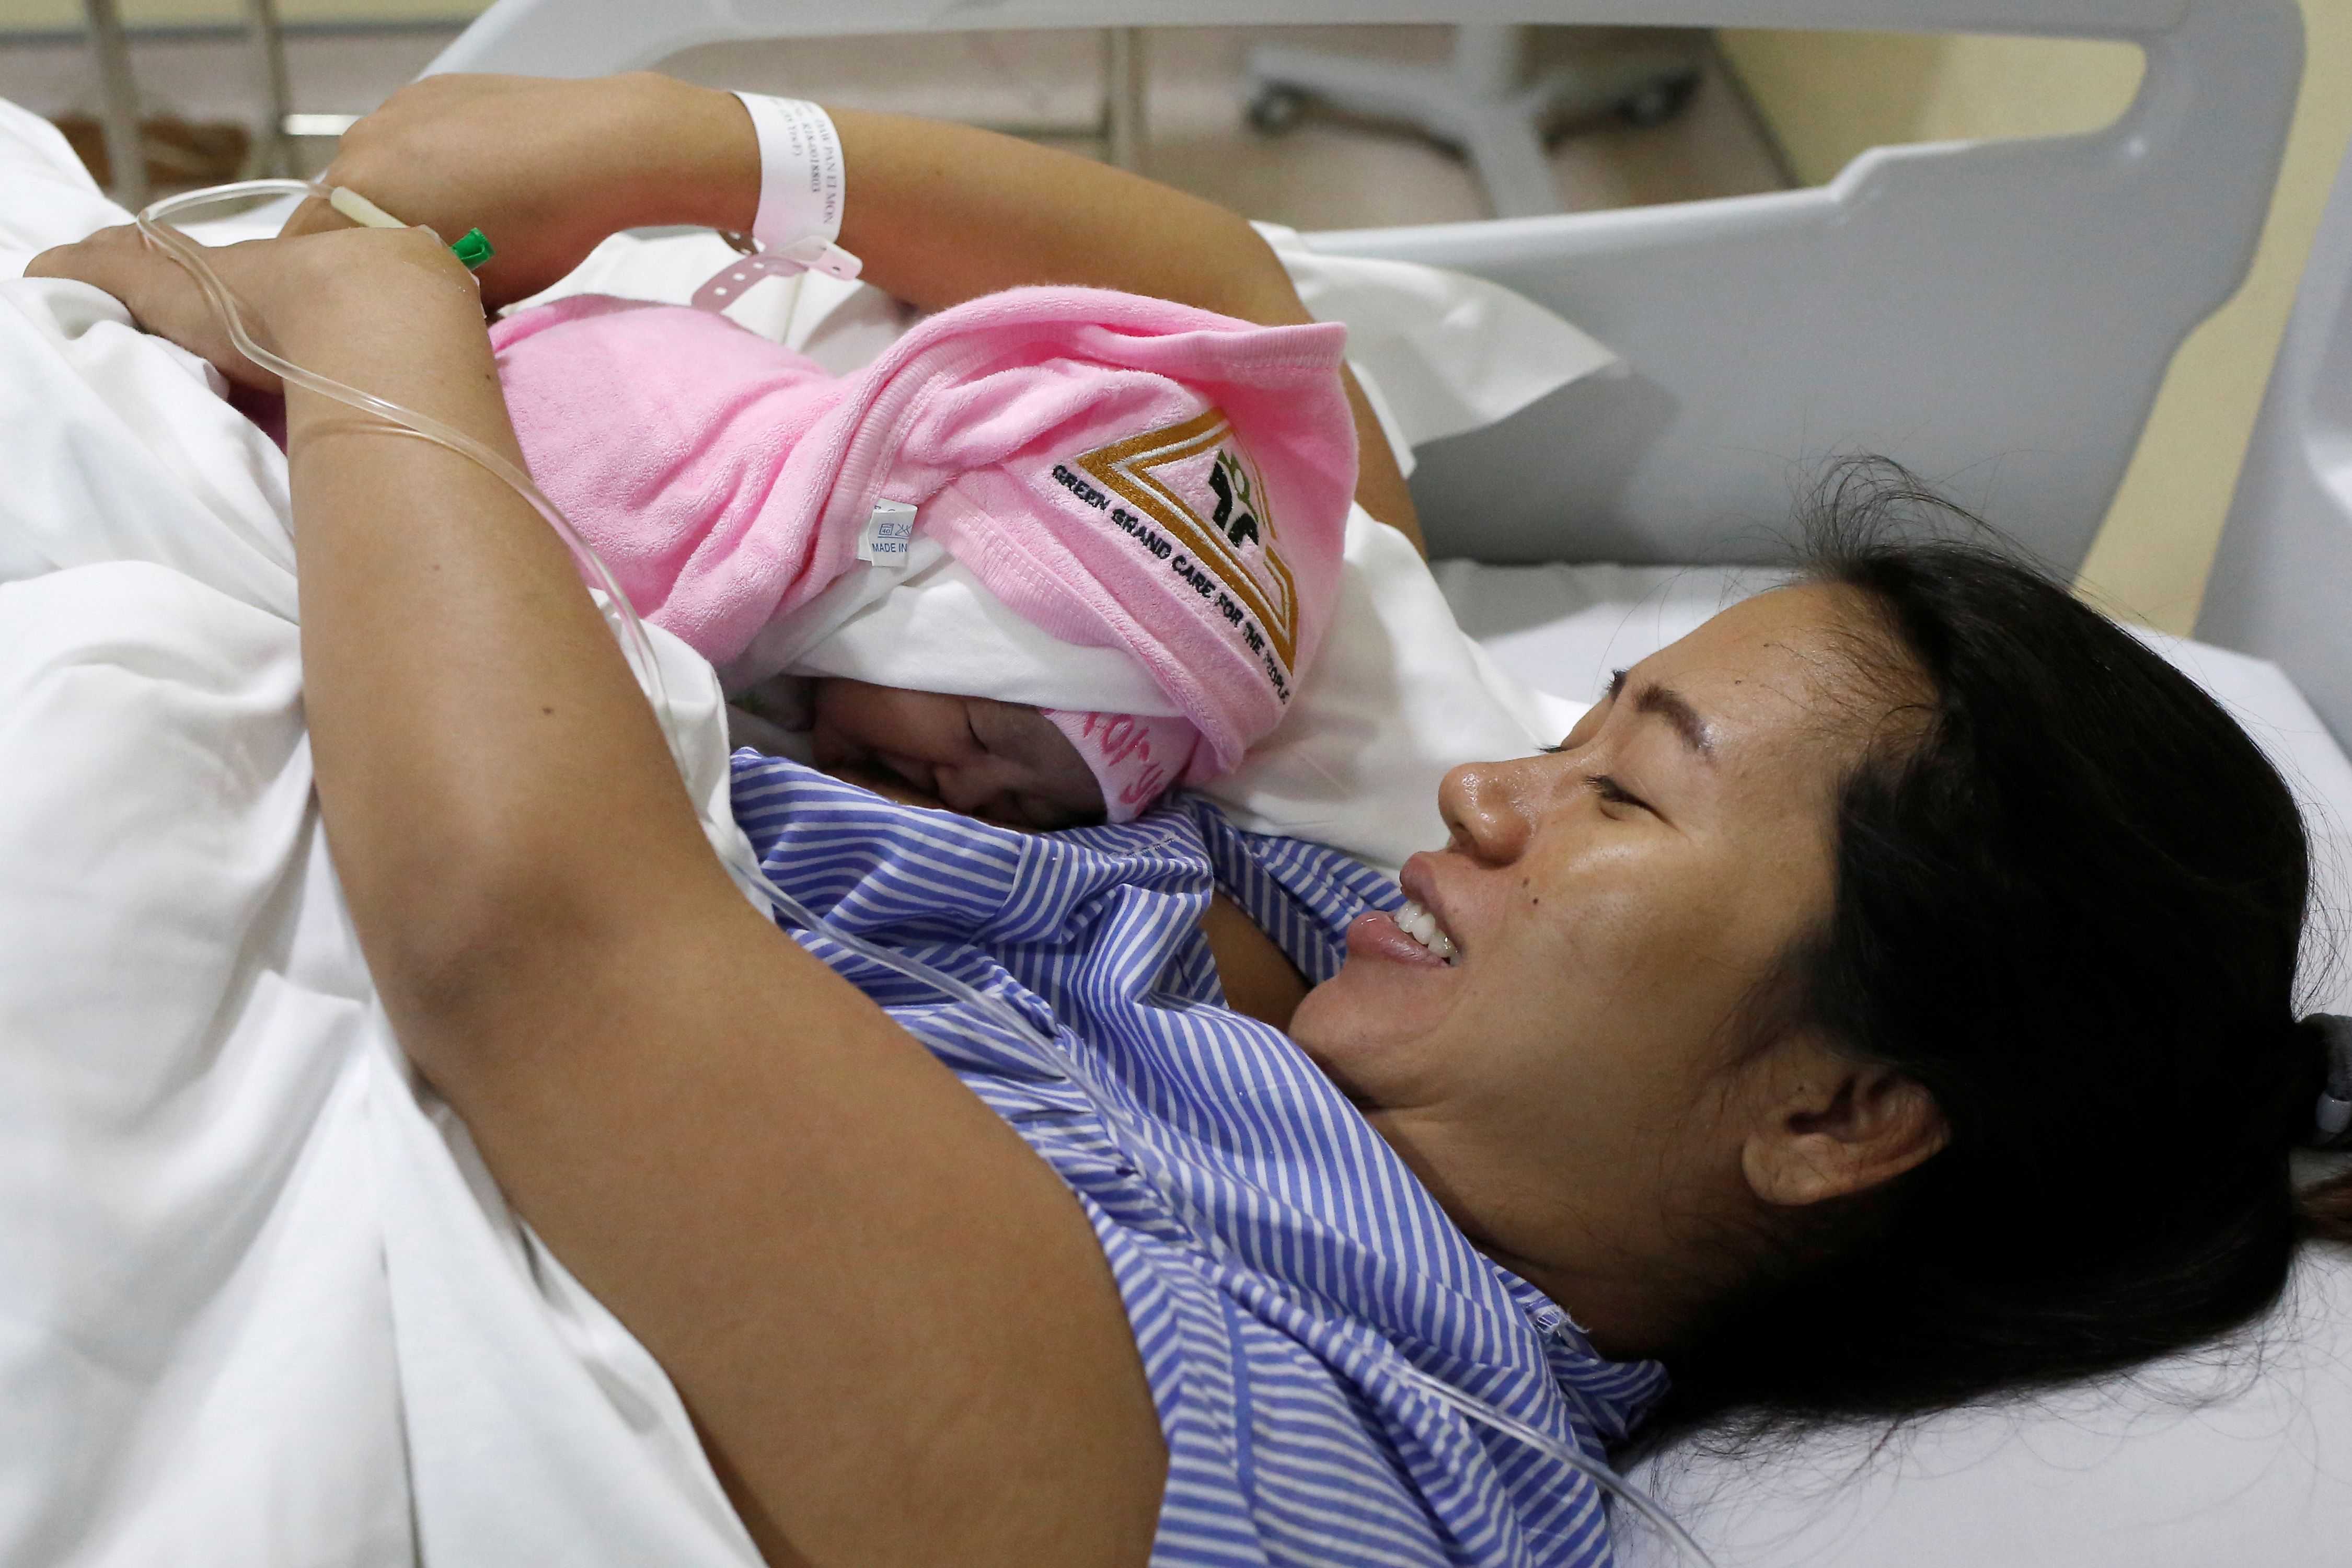 Pan Ei Mon, the wife of detained Reuters journalist Wa Lone, embraces her newborn baby girl Thet Htar Angel in her hospital room in Yangon on Aug. 10, 2018. (Ann Wang—AFP/Getty Images)